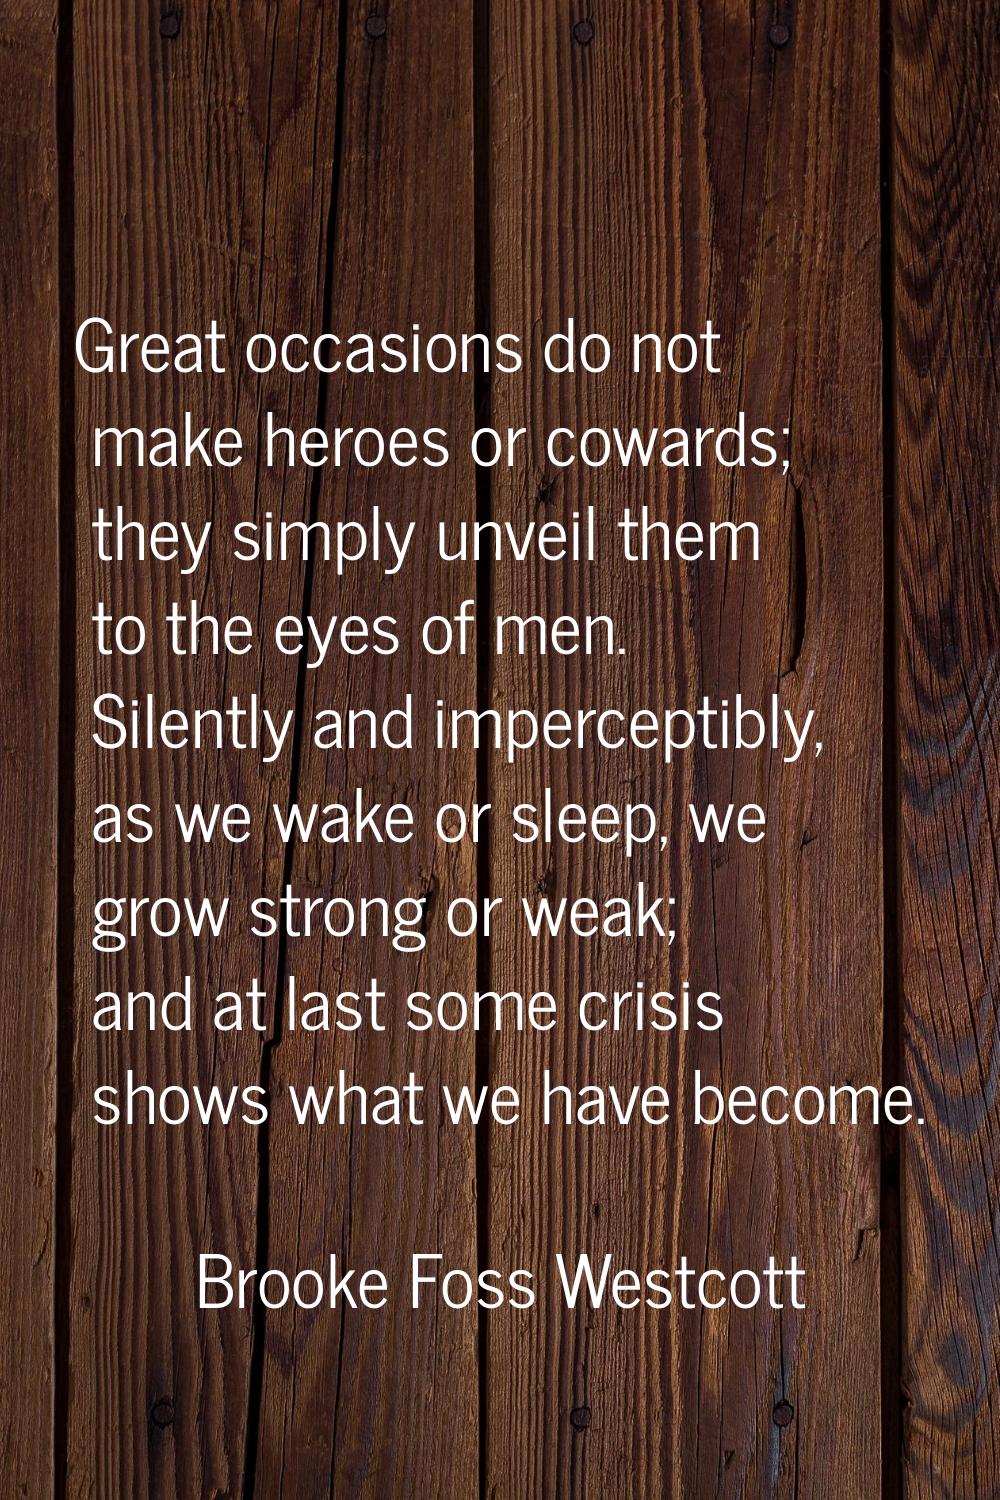 Great occasions do not make heroes or cowards; they simply unveil them to the eyes of men. Silently